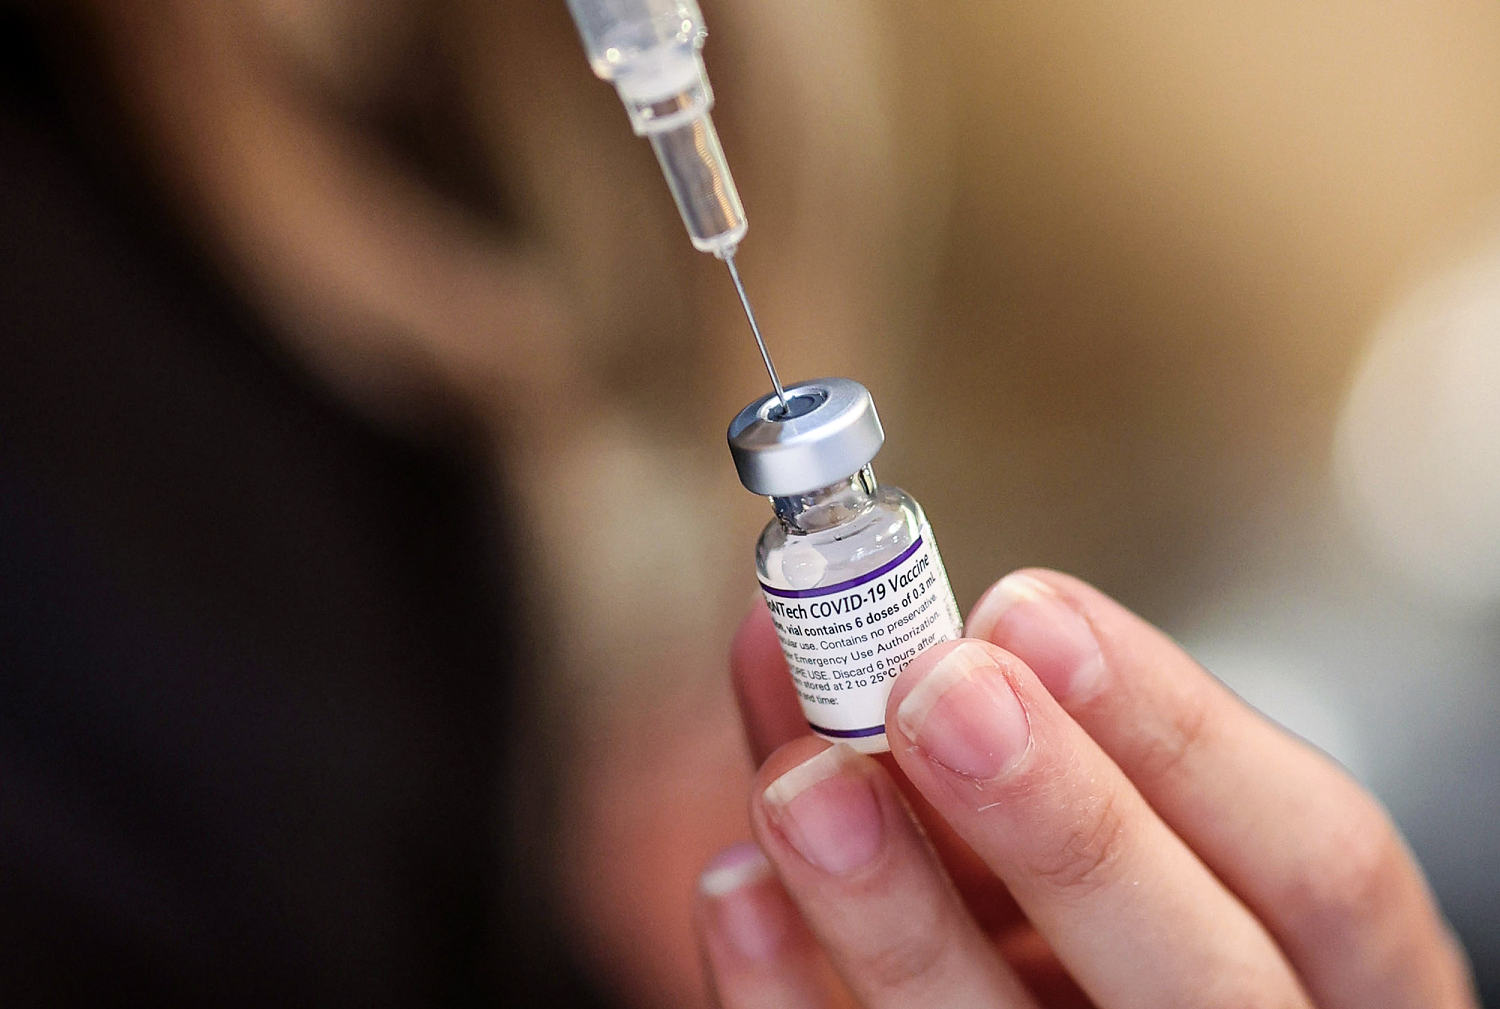 Covid vaccines not linked to sudden death in young people, CDC report finds